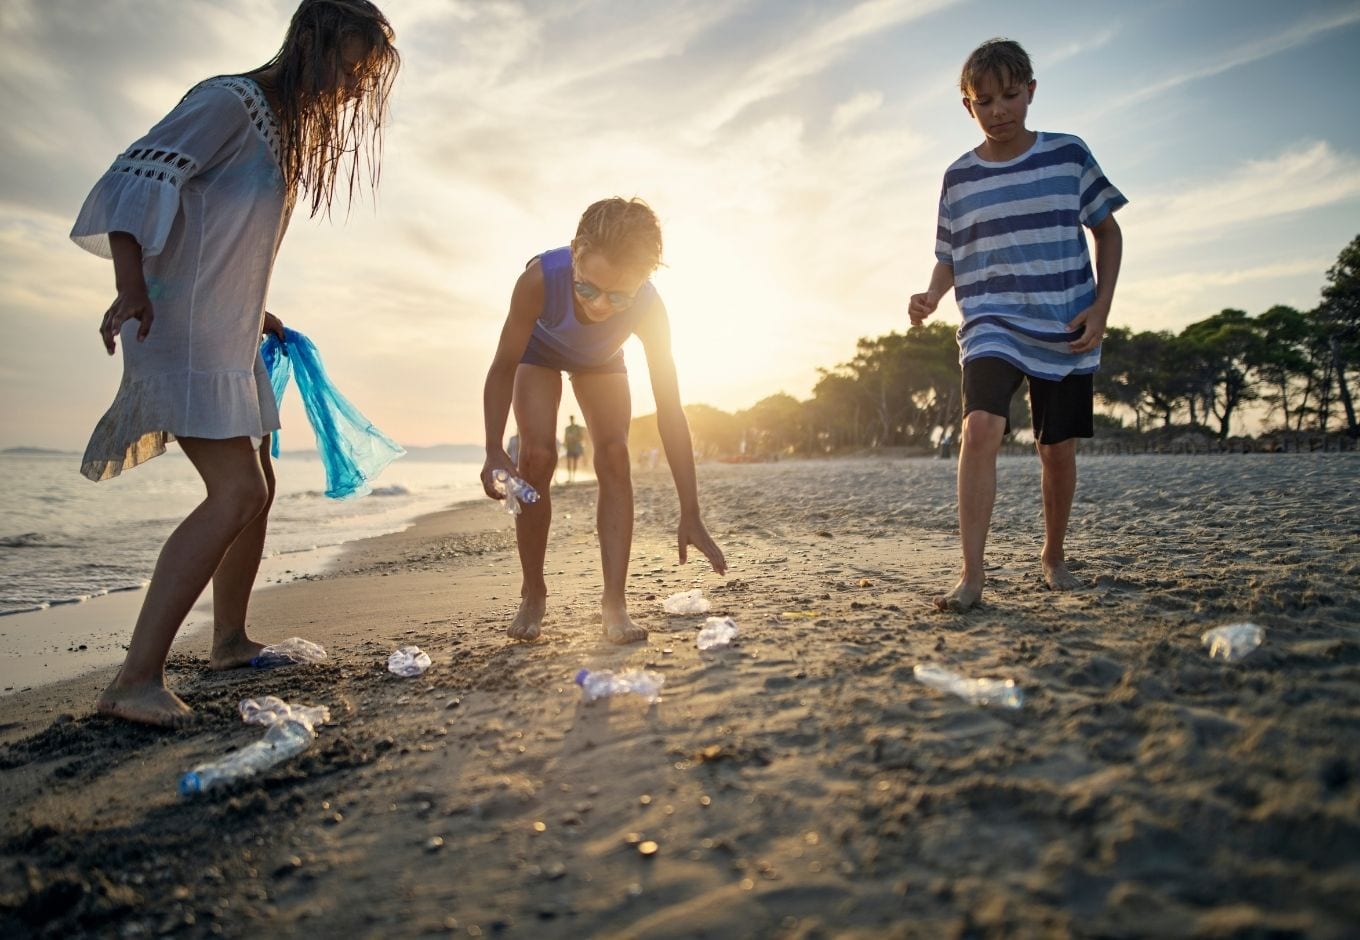 Three kids cleaning up a beach during the sunset.